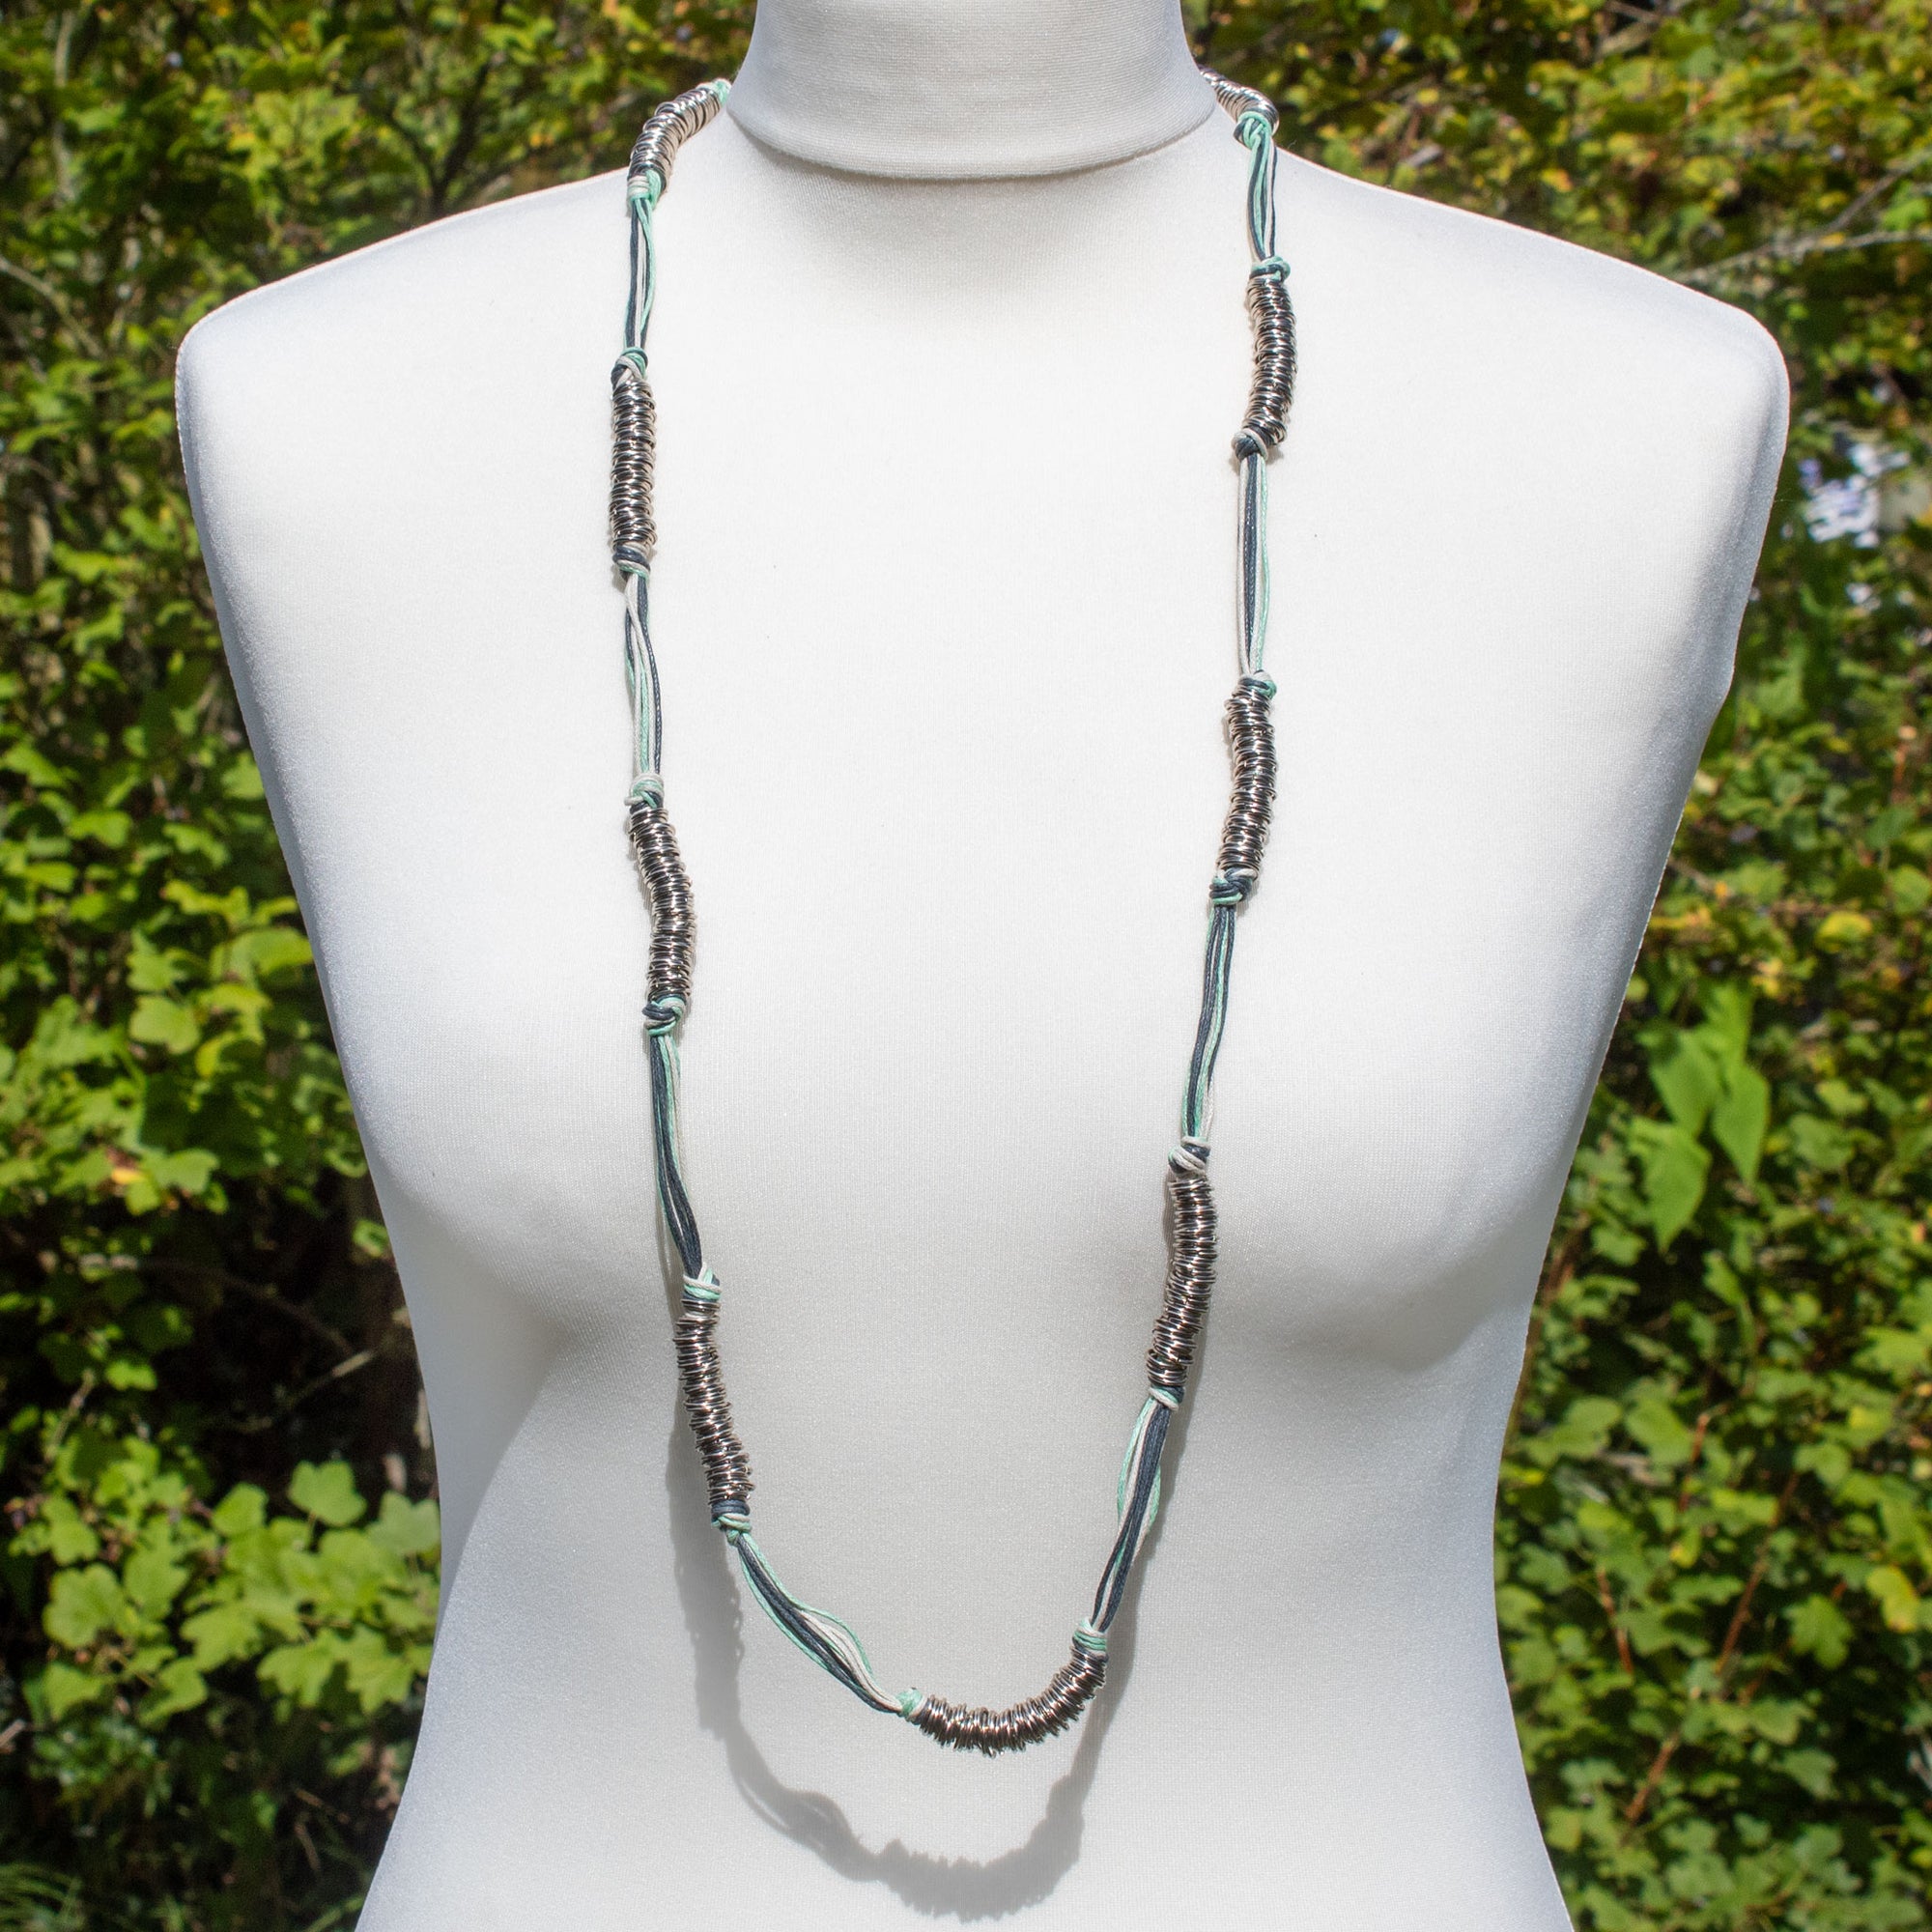 Mint Green & Blue Cord & Metallic Silver Ring Necklace | Necklace - The Naughty Shrew